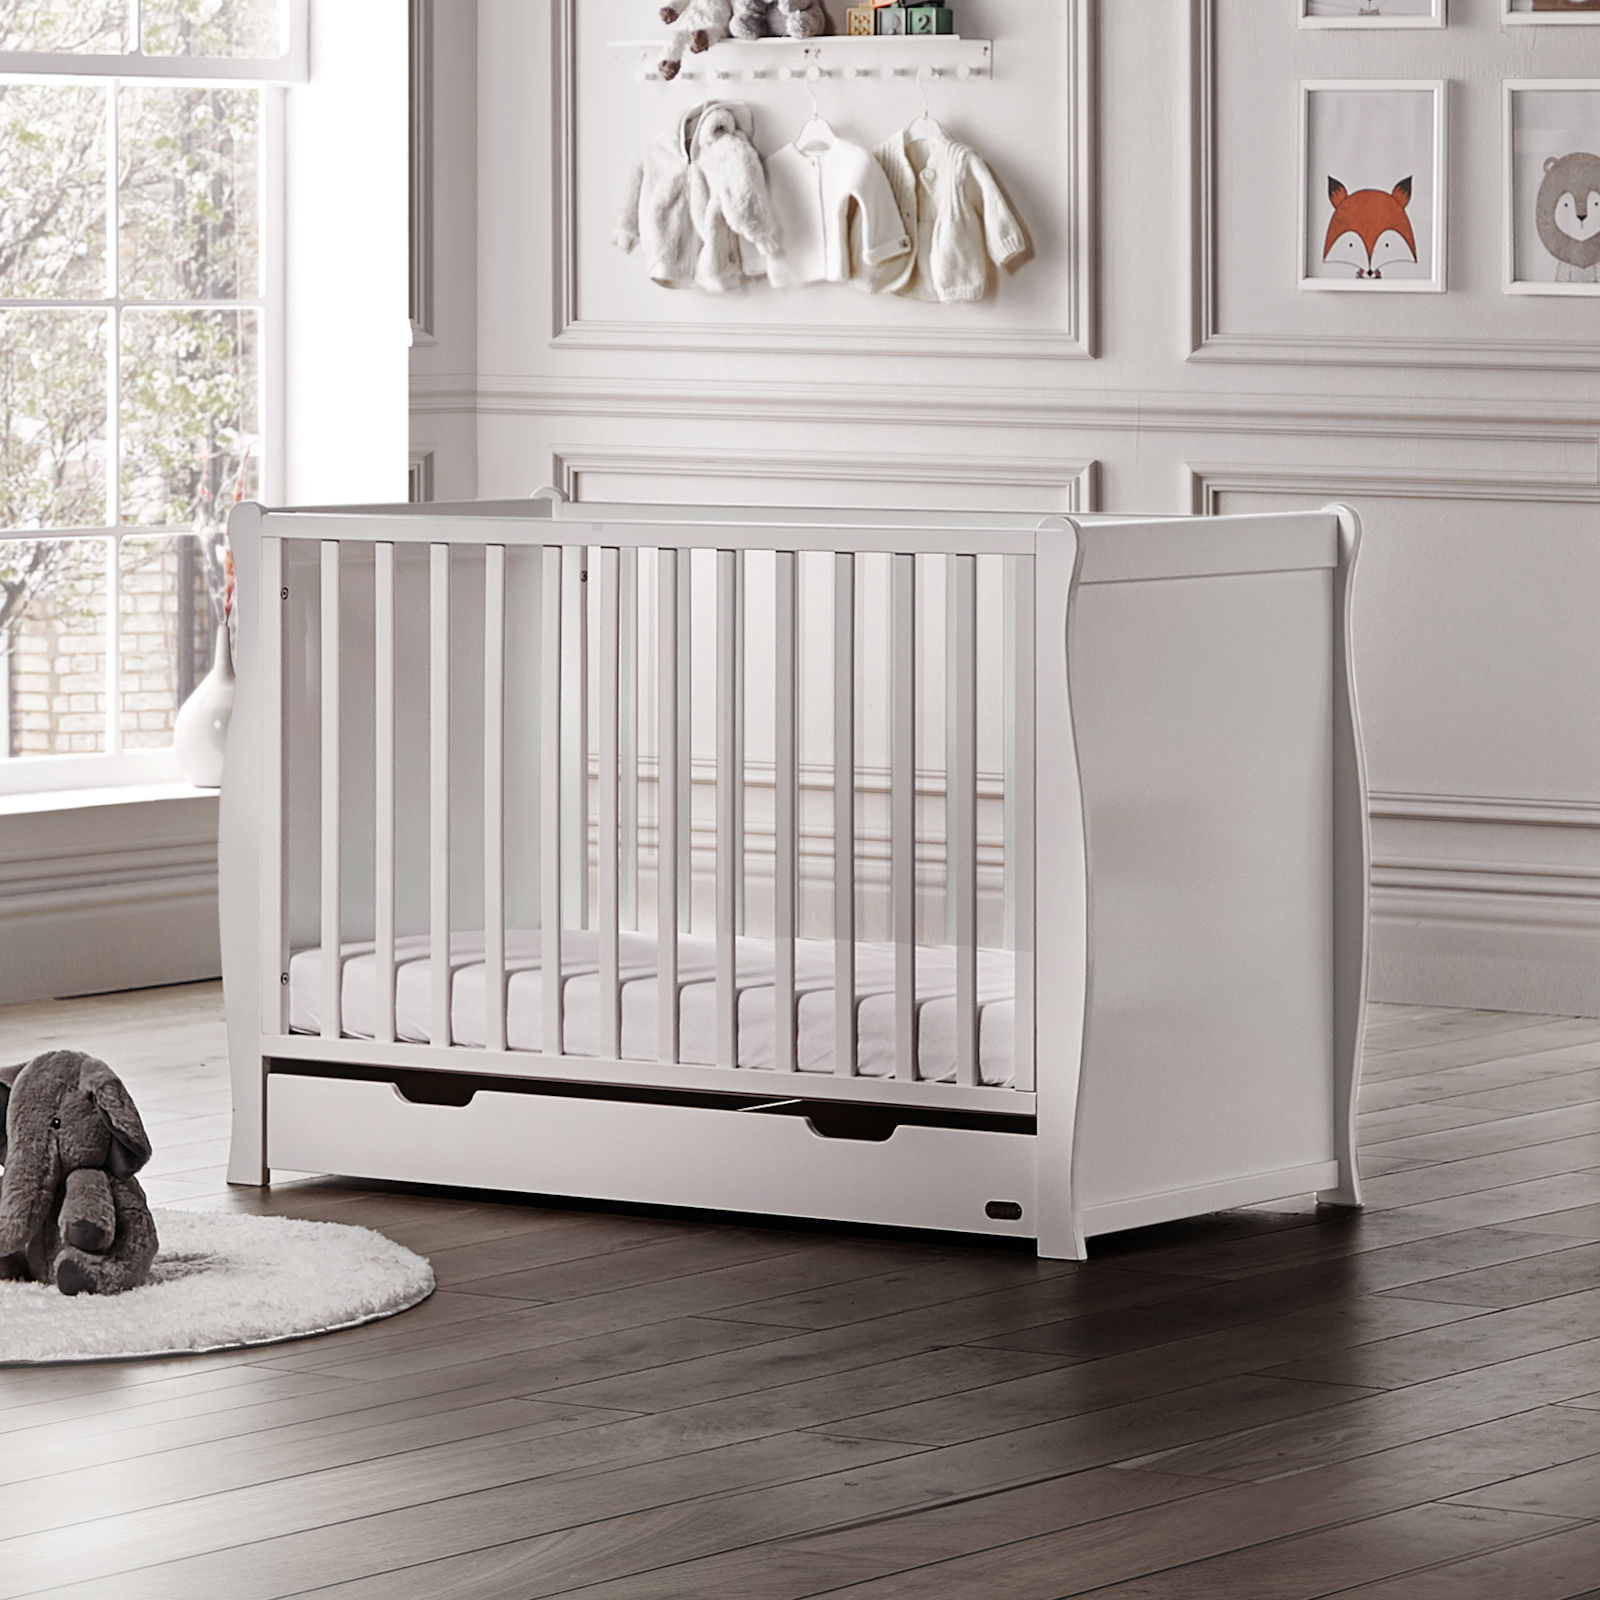 Puggle Chelford Sleigh Cot With Drawer & Maxi Air Cool Mattress - White